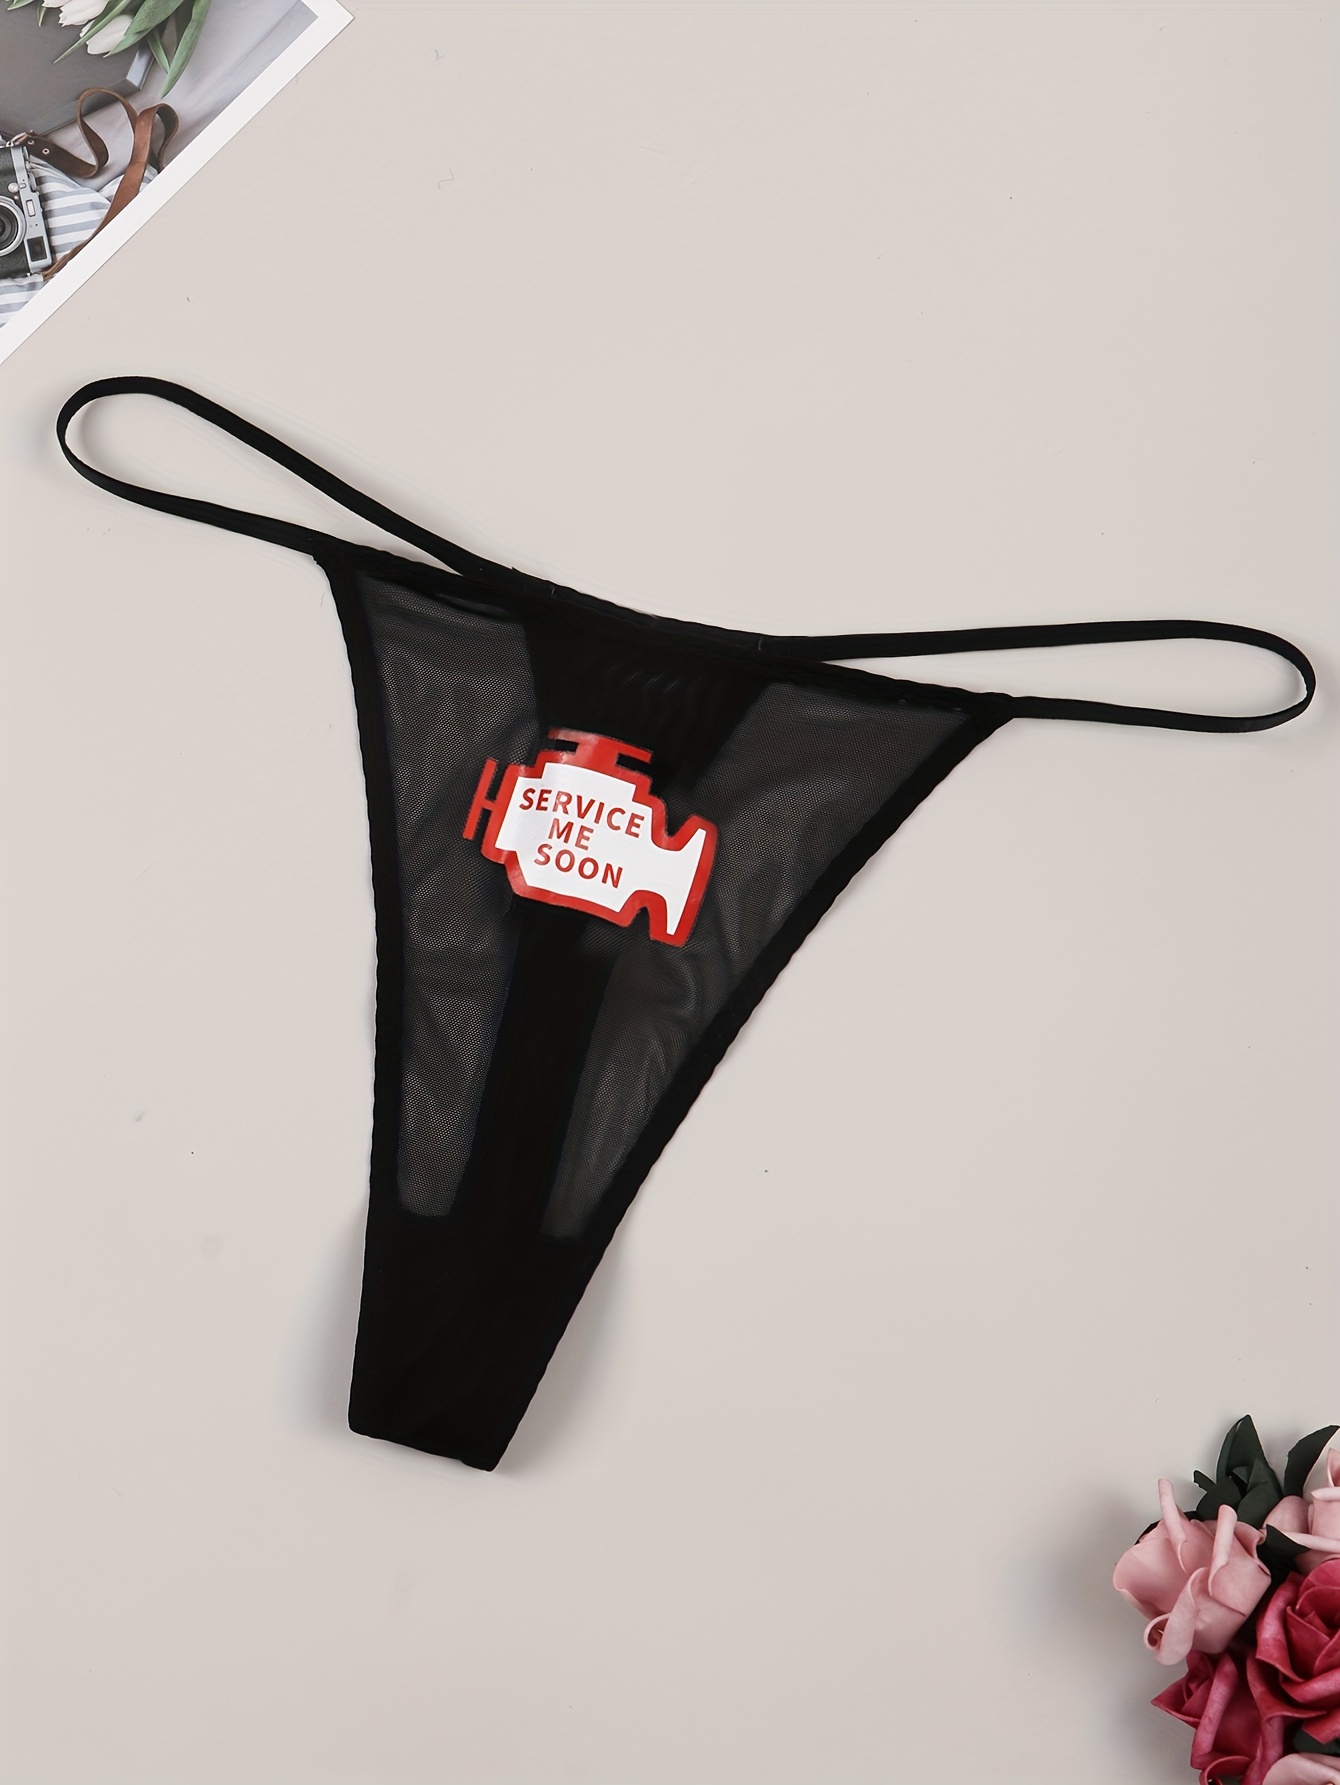 V-String Heart Printed Thong for Womens Sexy T Back Low Waist